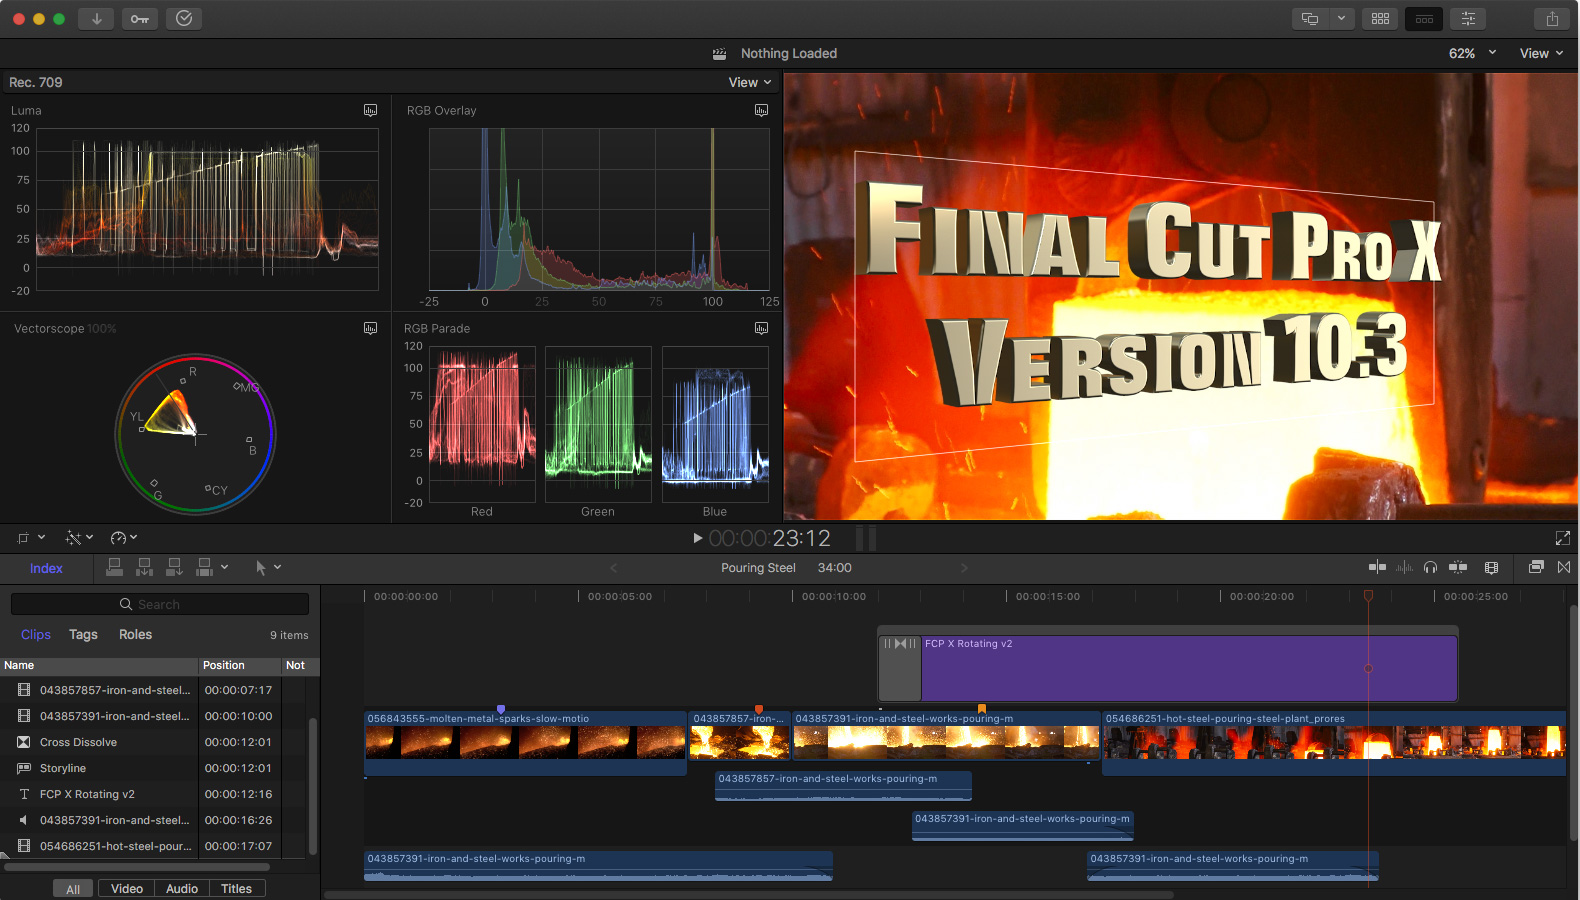 fcpx 10.3